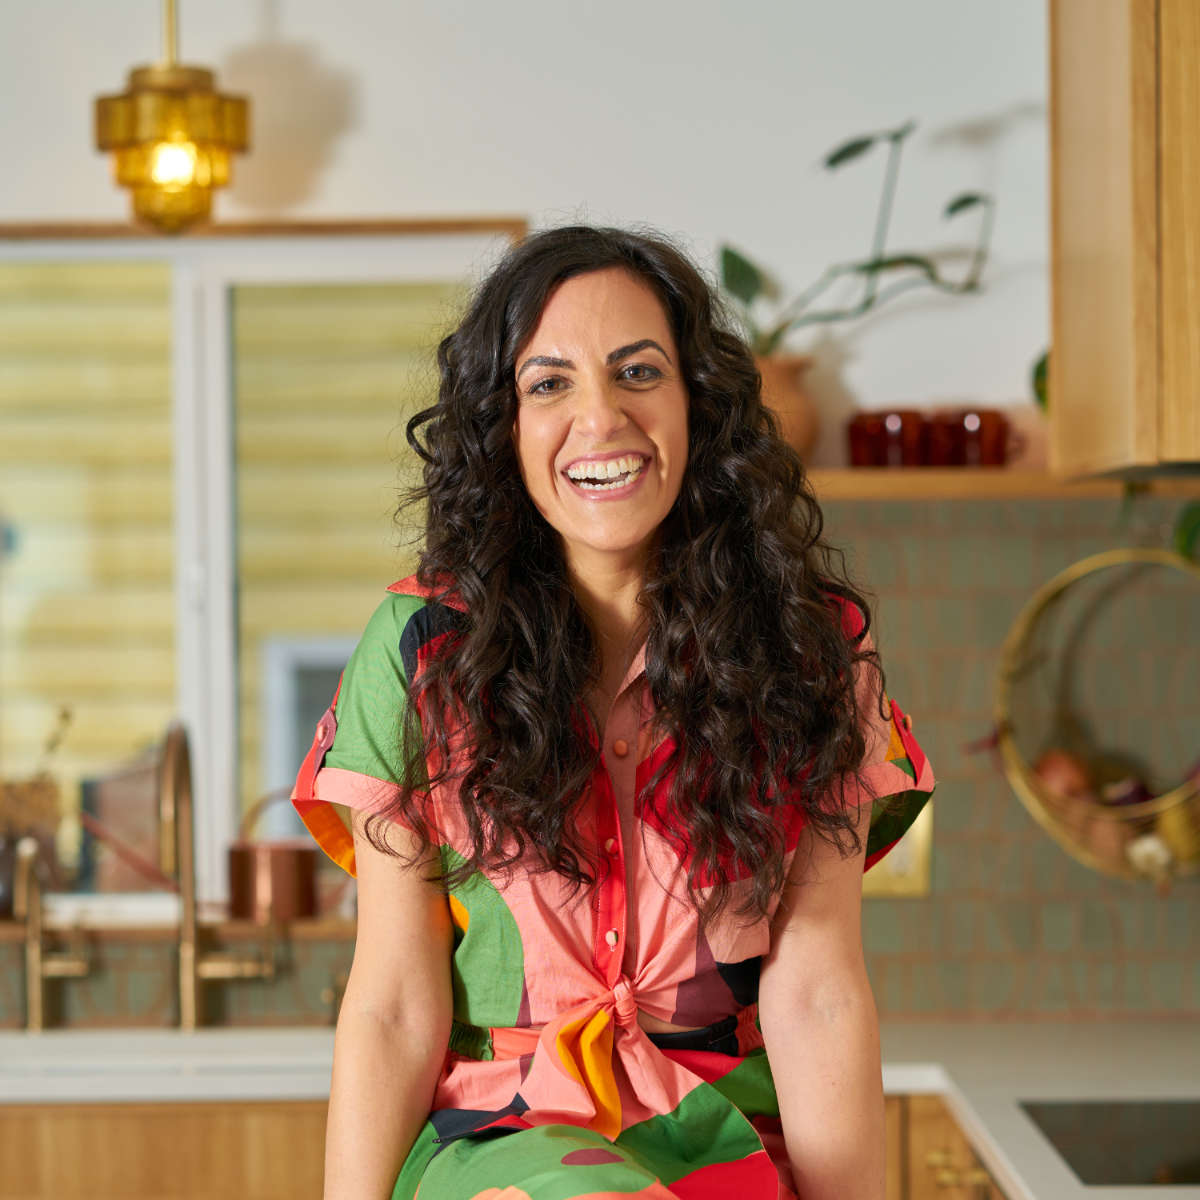 Woman sitting on a kitchen countertop with brown curly hair and a colorful jumpsuit.